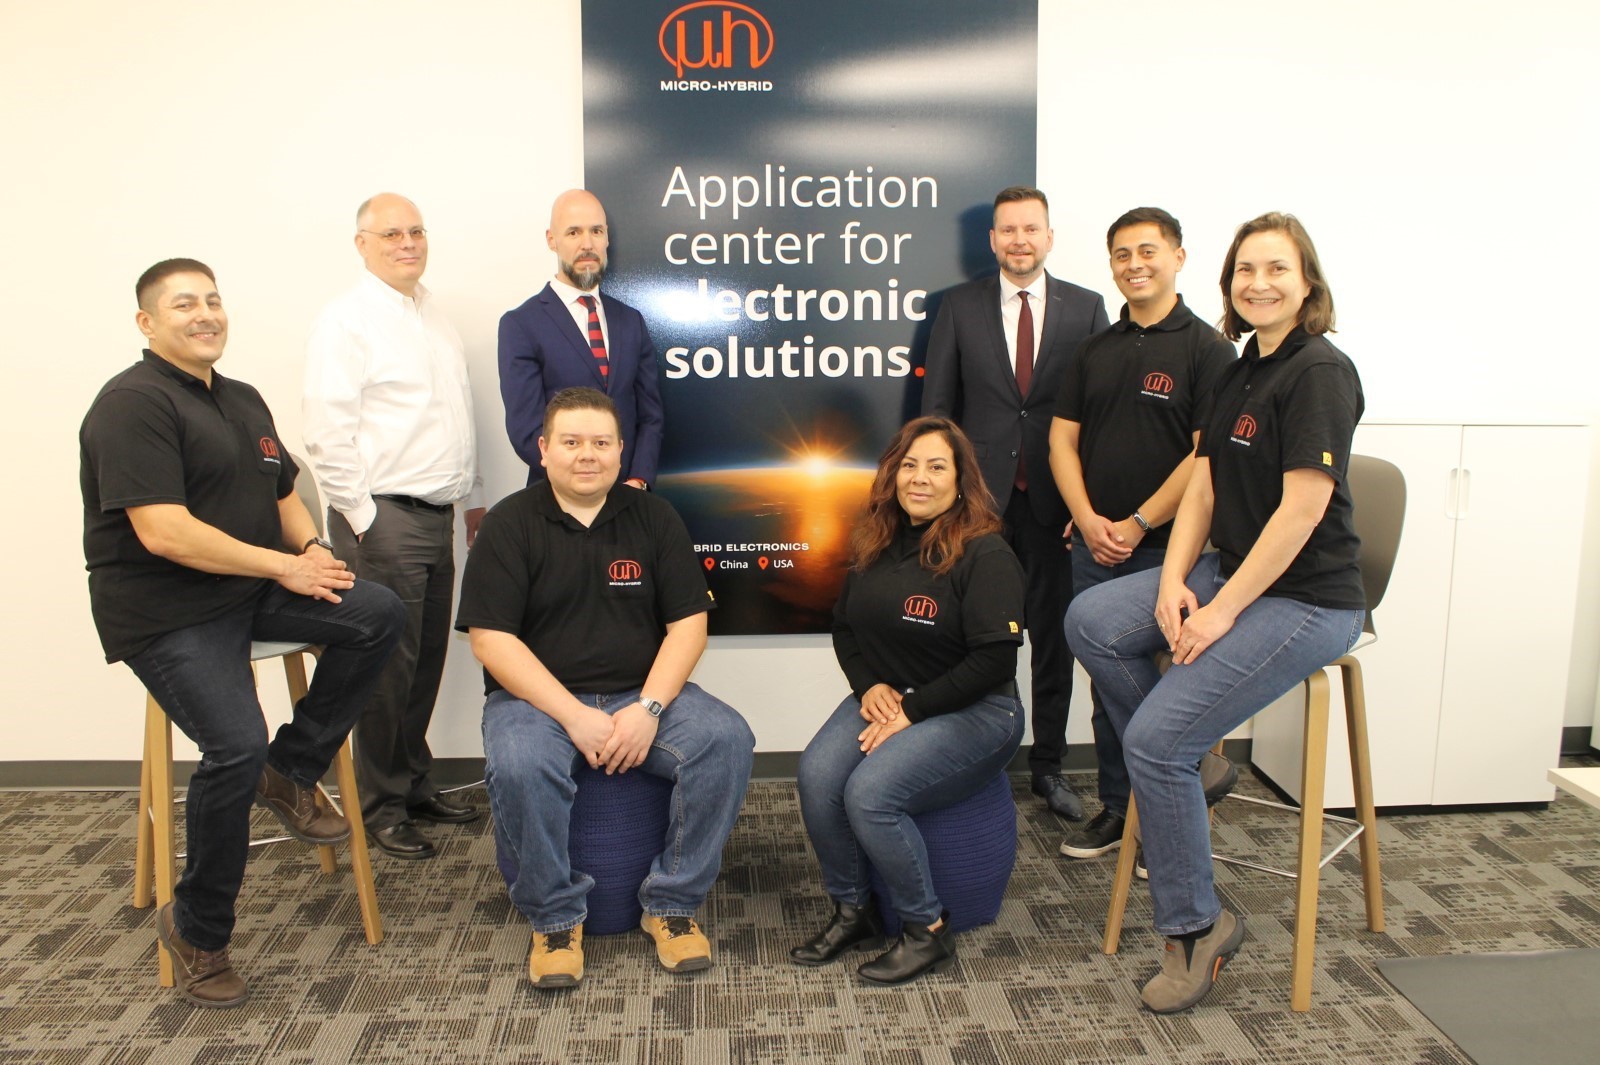 Micro-Hybrid Team posed in their new application center in the UA Tech Park